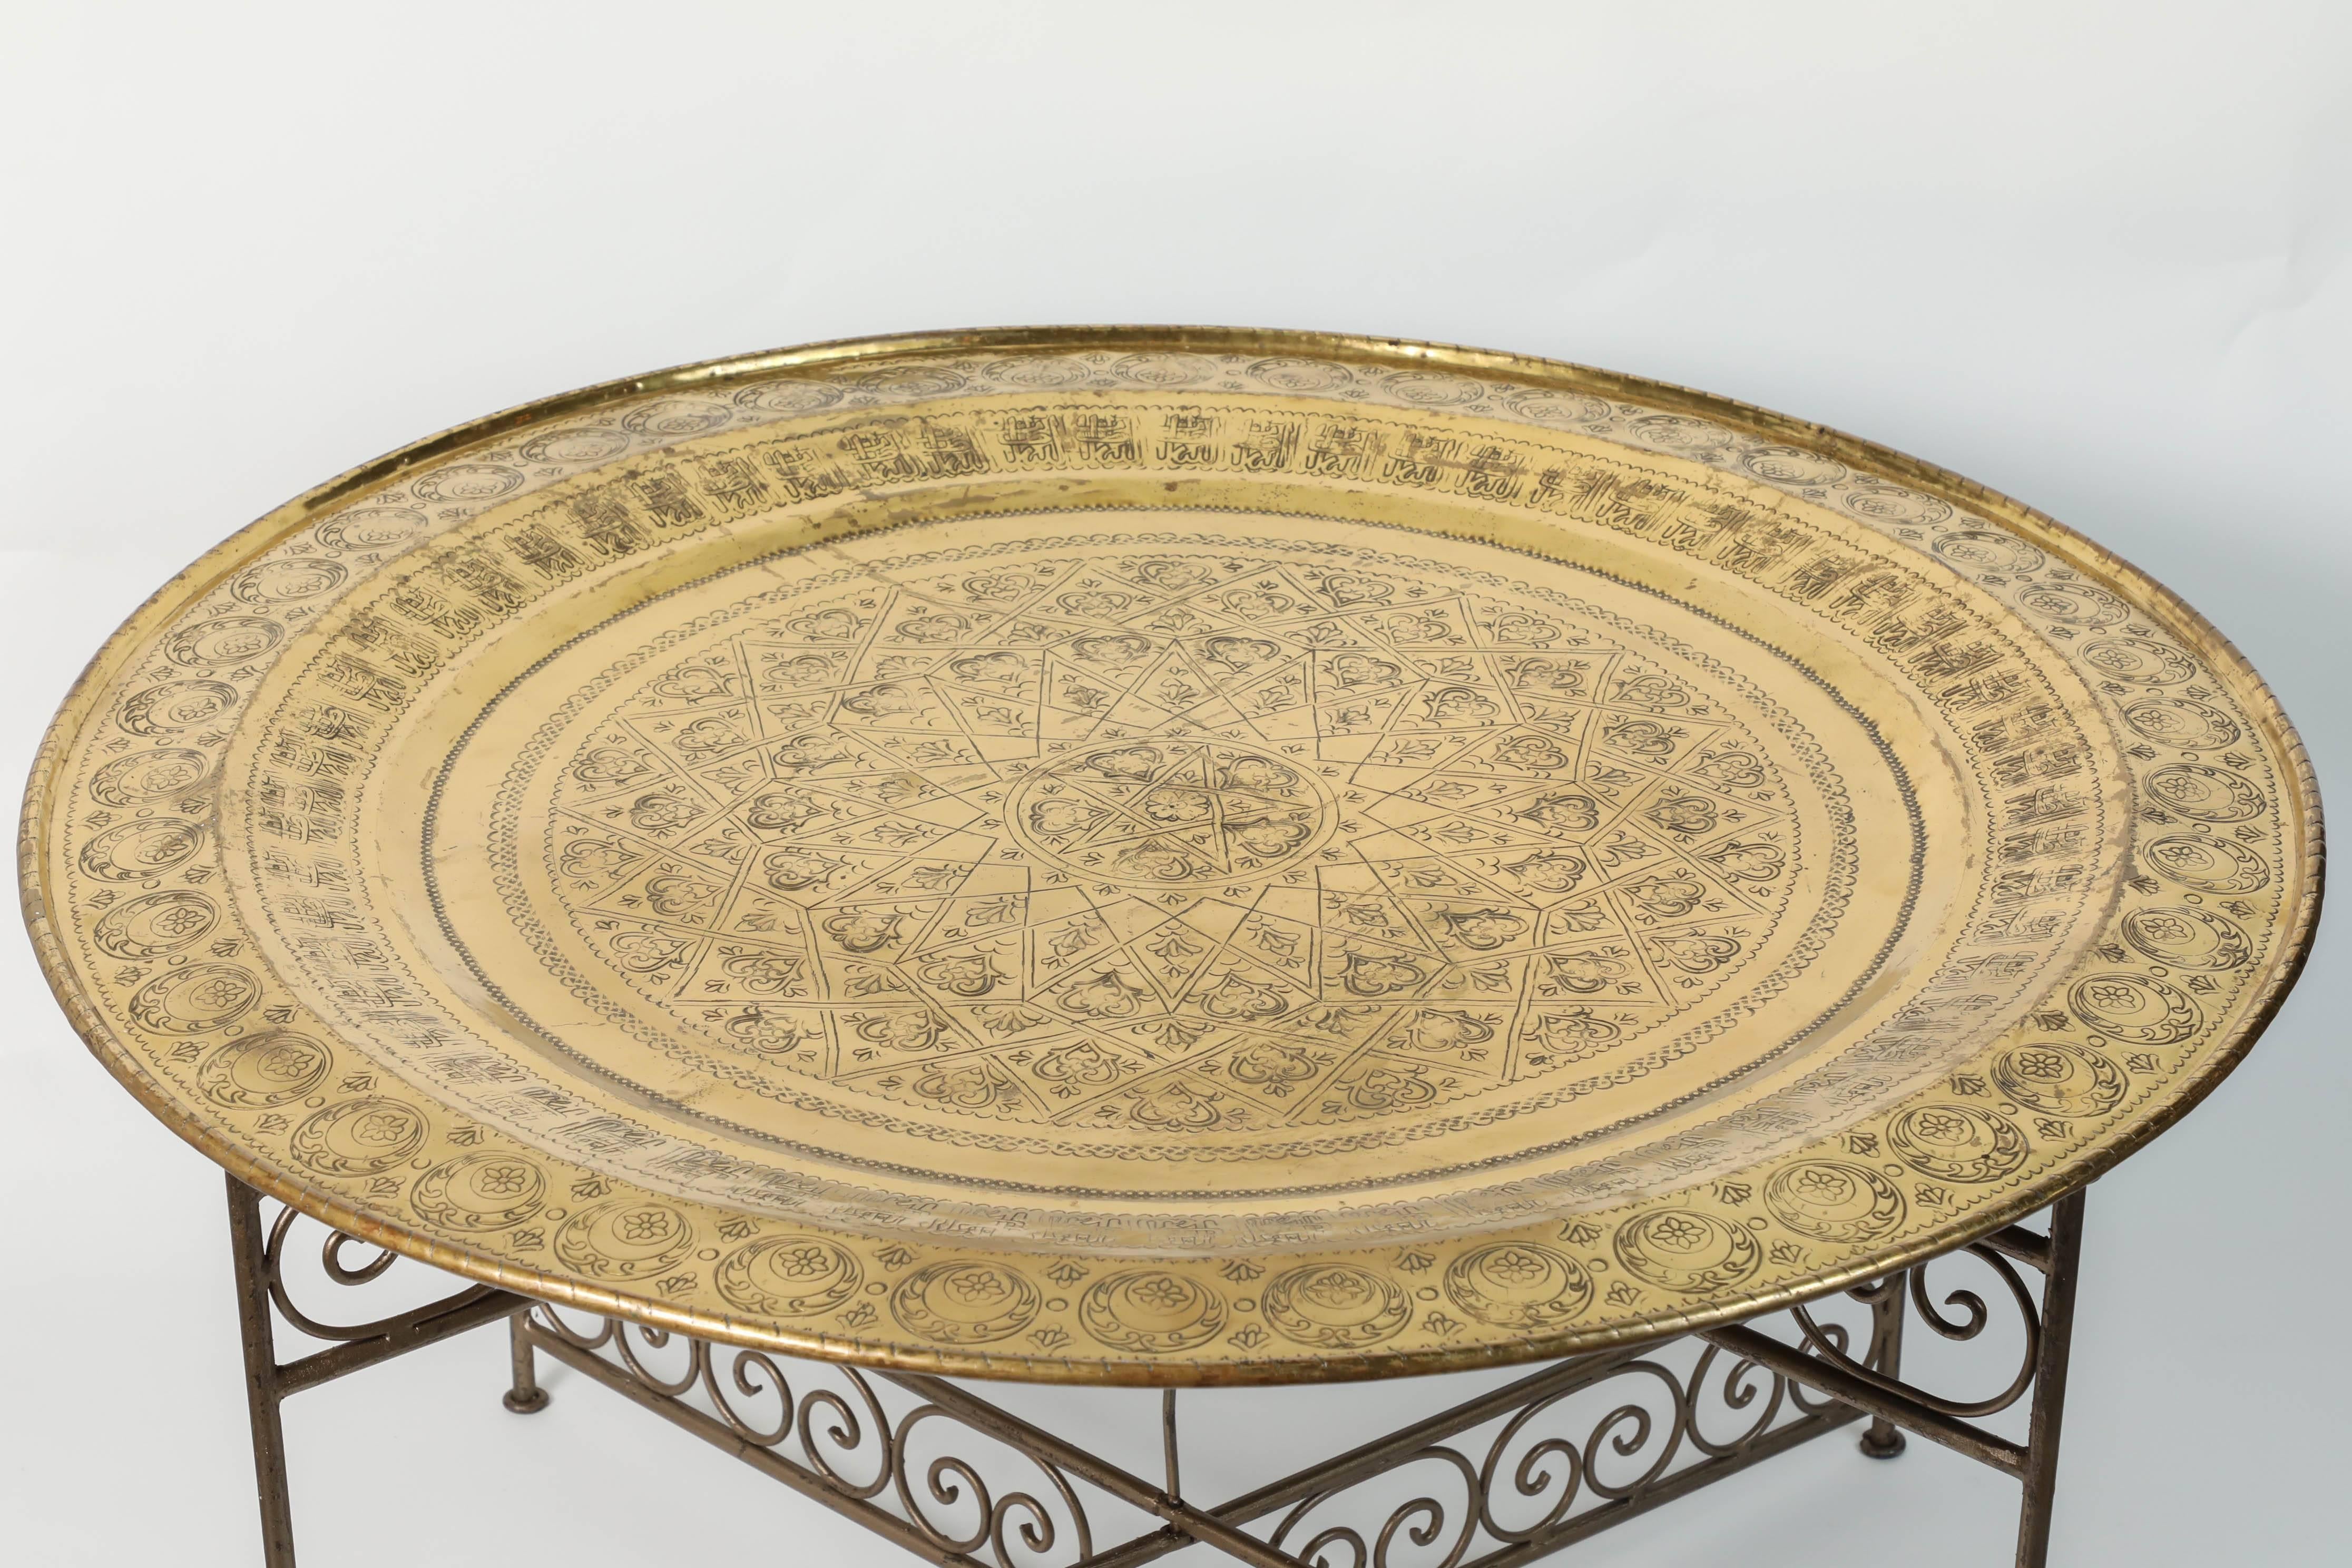 Handcrafted Moroccan round brass tray table on iron base.
Moroccan round brass tray table on iron folding base.
Nice handcrafted polished brass tray, hand-hammered with Moroccan traditional designs. 
Handmade in Fez by Master artisans. 
Great to